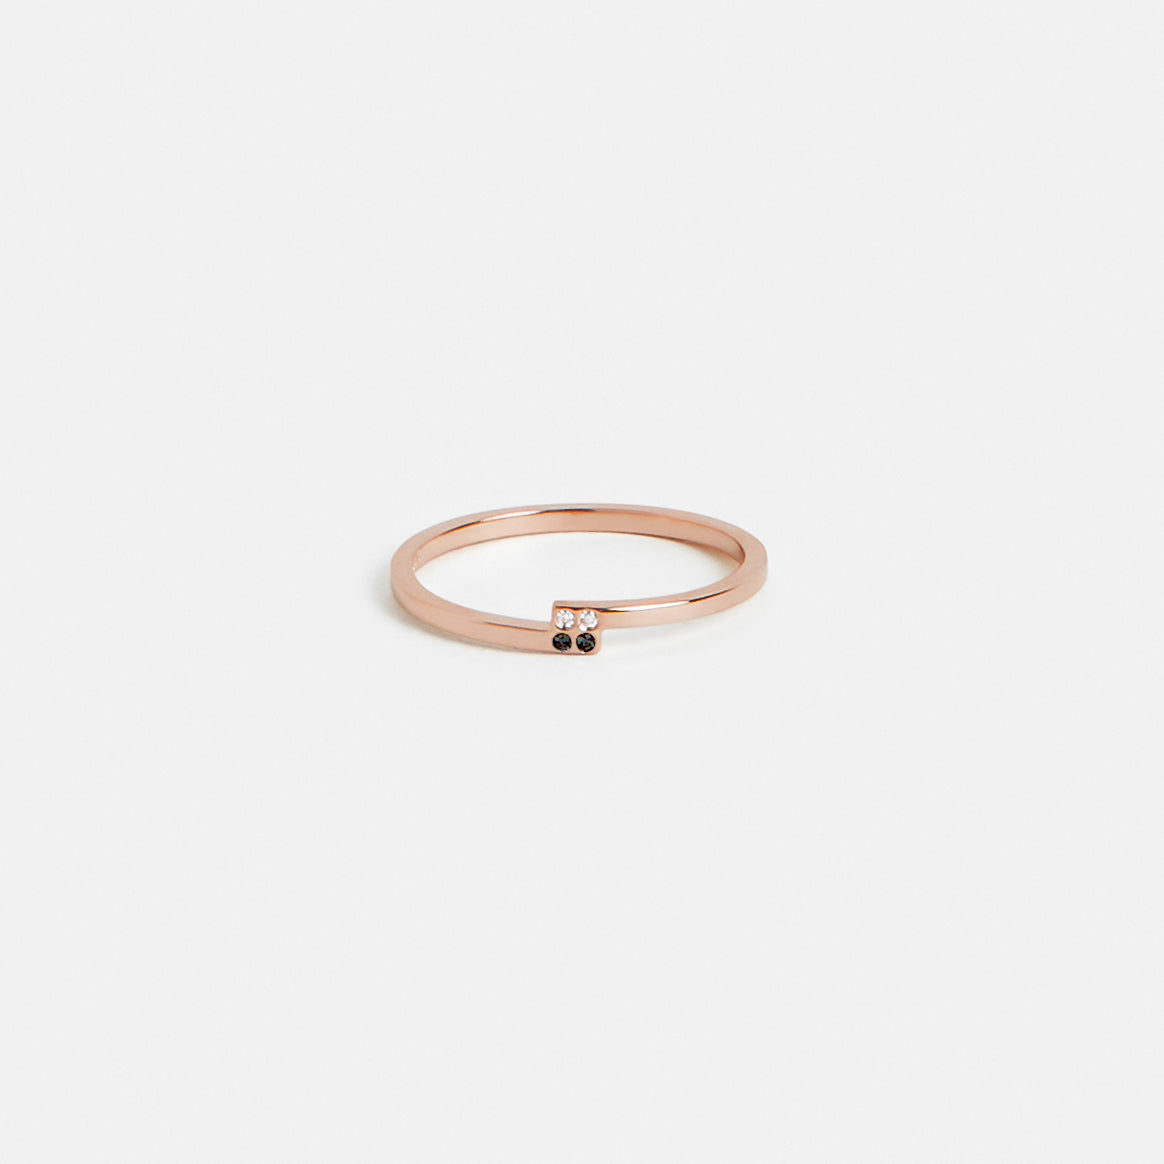 Piva Thin Ring in 14k Gold set with Black Diamonds By SHW Fine Jewelry NYC